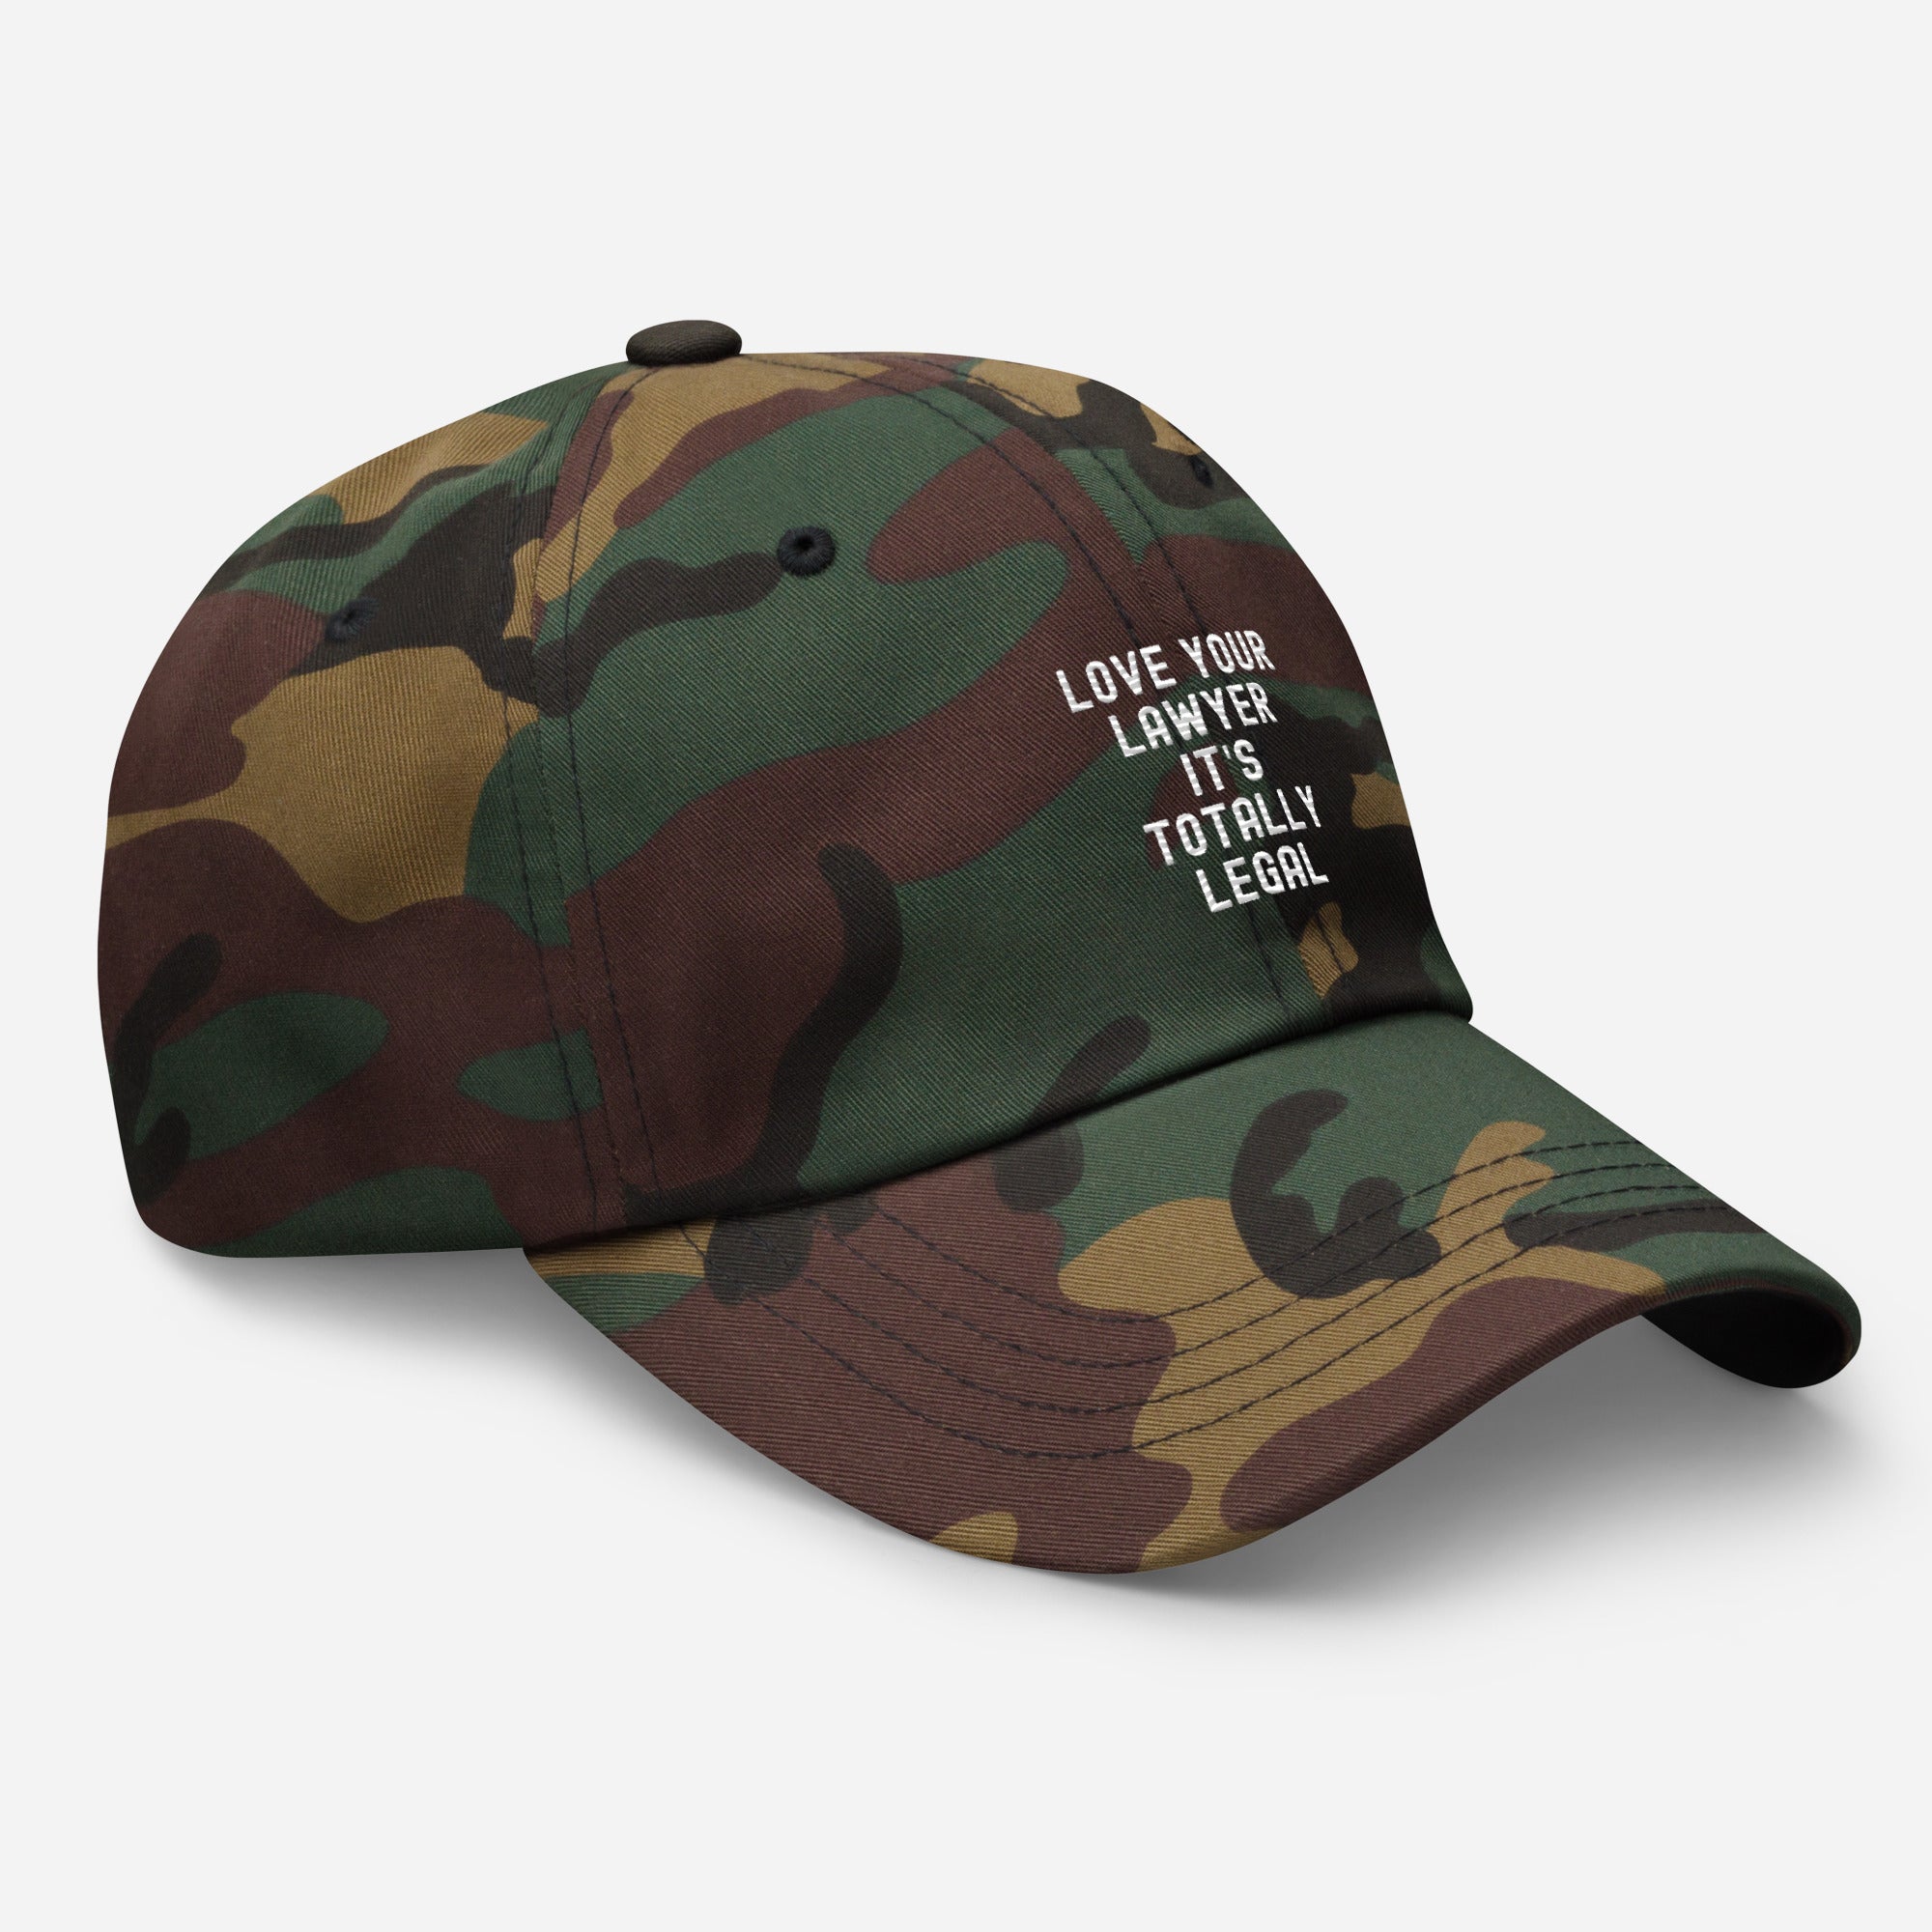 Hat | Lover your lawyer, it is totally legal